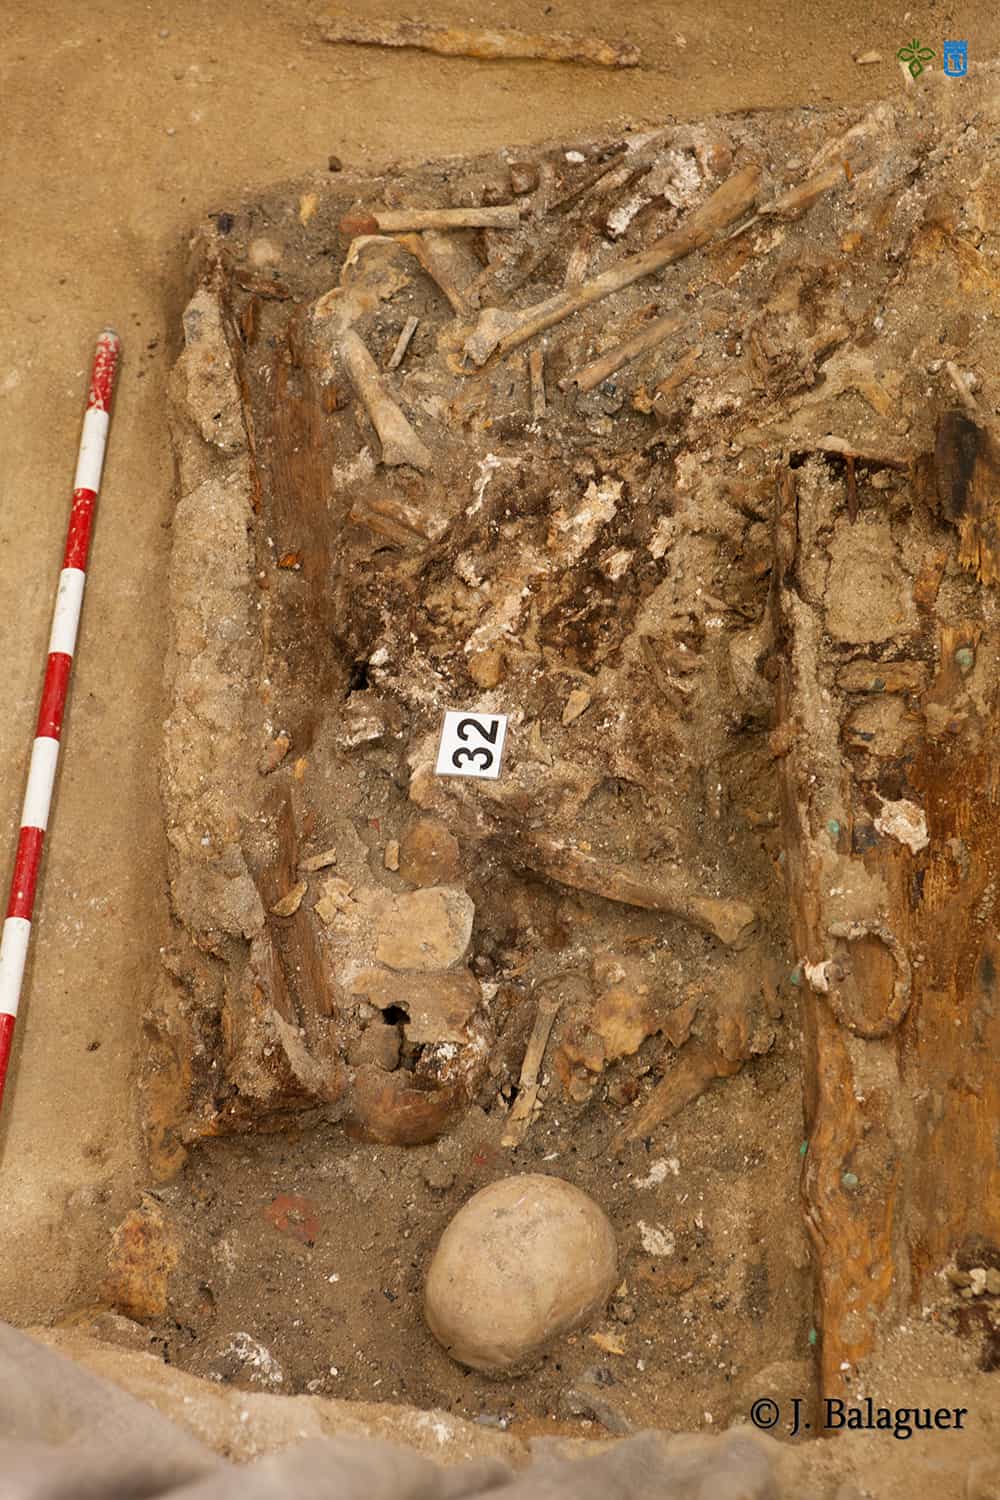 This handout picture released on March 17, 2015 by Sociedad de Ciencia Aranzadi shows an archeological reduction, with remains of a minimun of 15 individuals being ten of them adults and five children, that could include the remains of Spanish literary giant Miguel de Cervantes at the Convent of the Barefoot Trinitarians in Madrid.